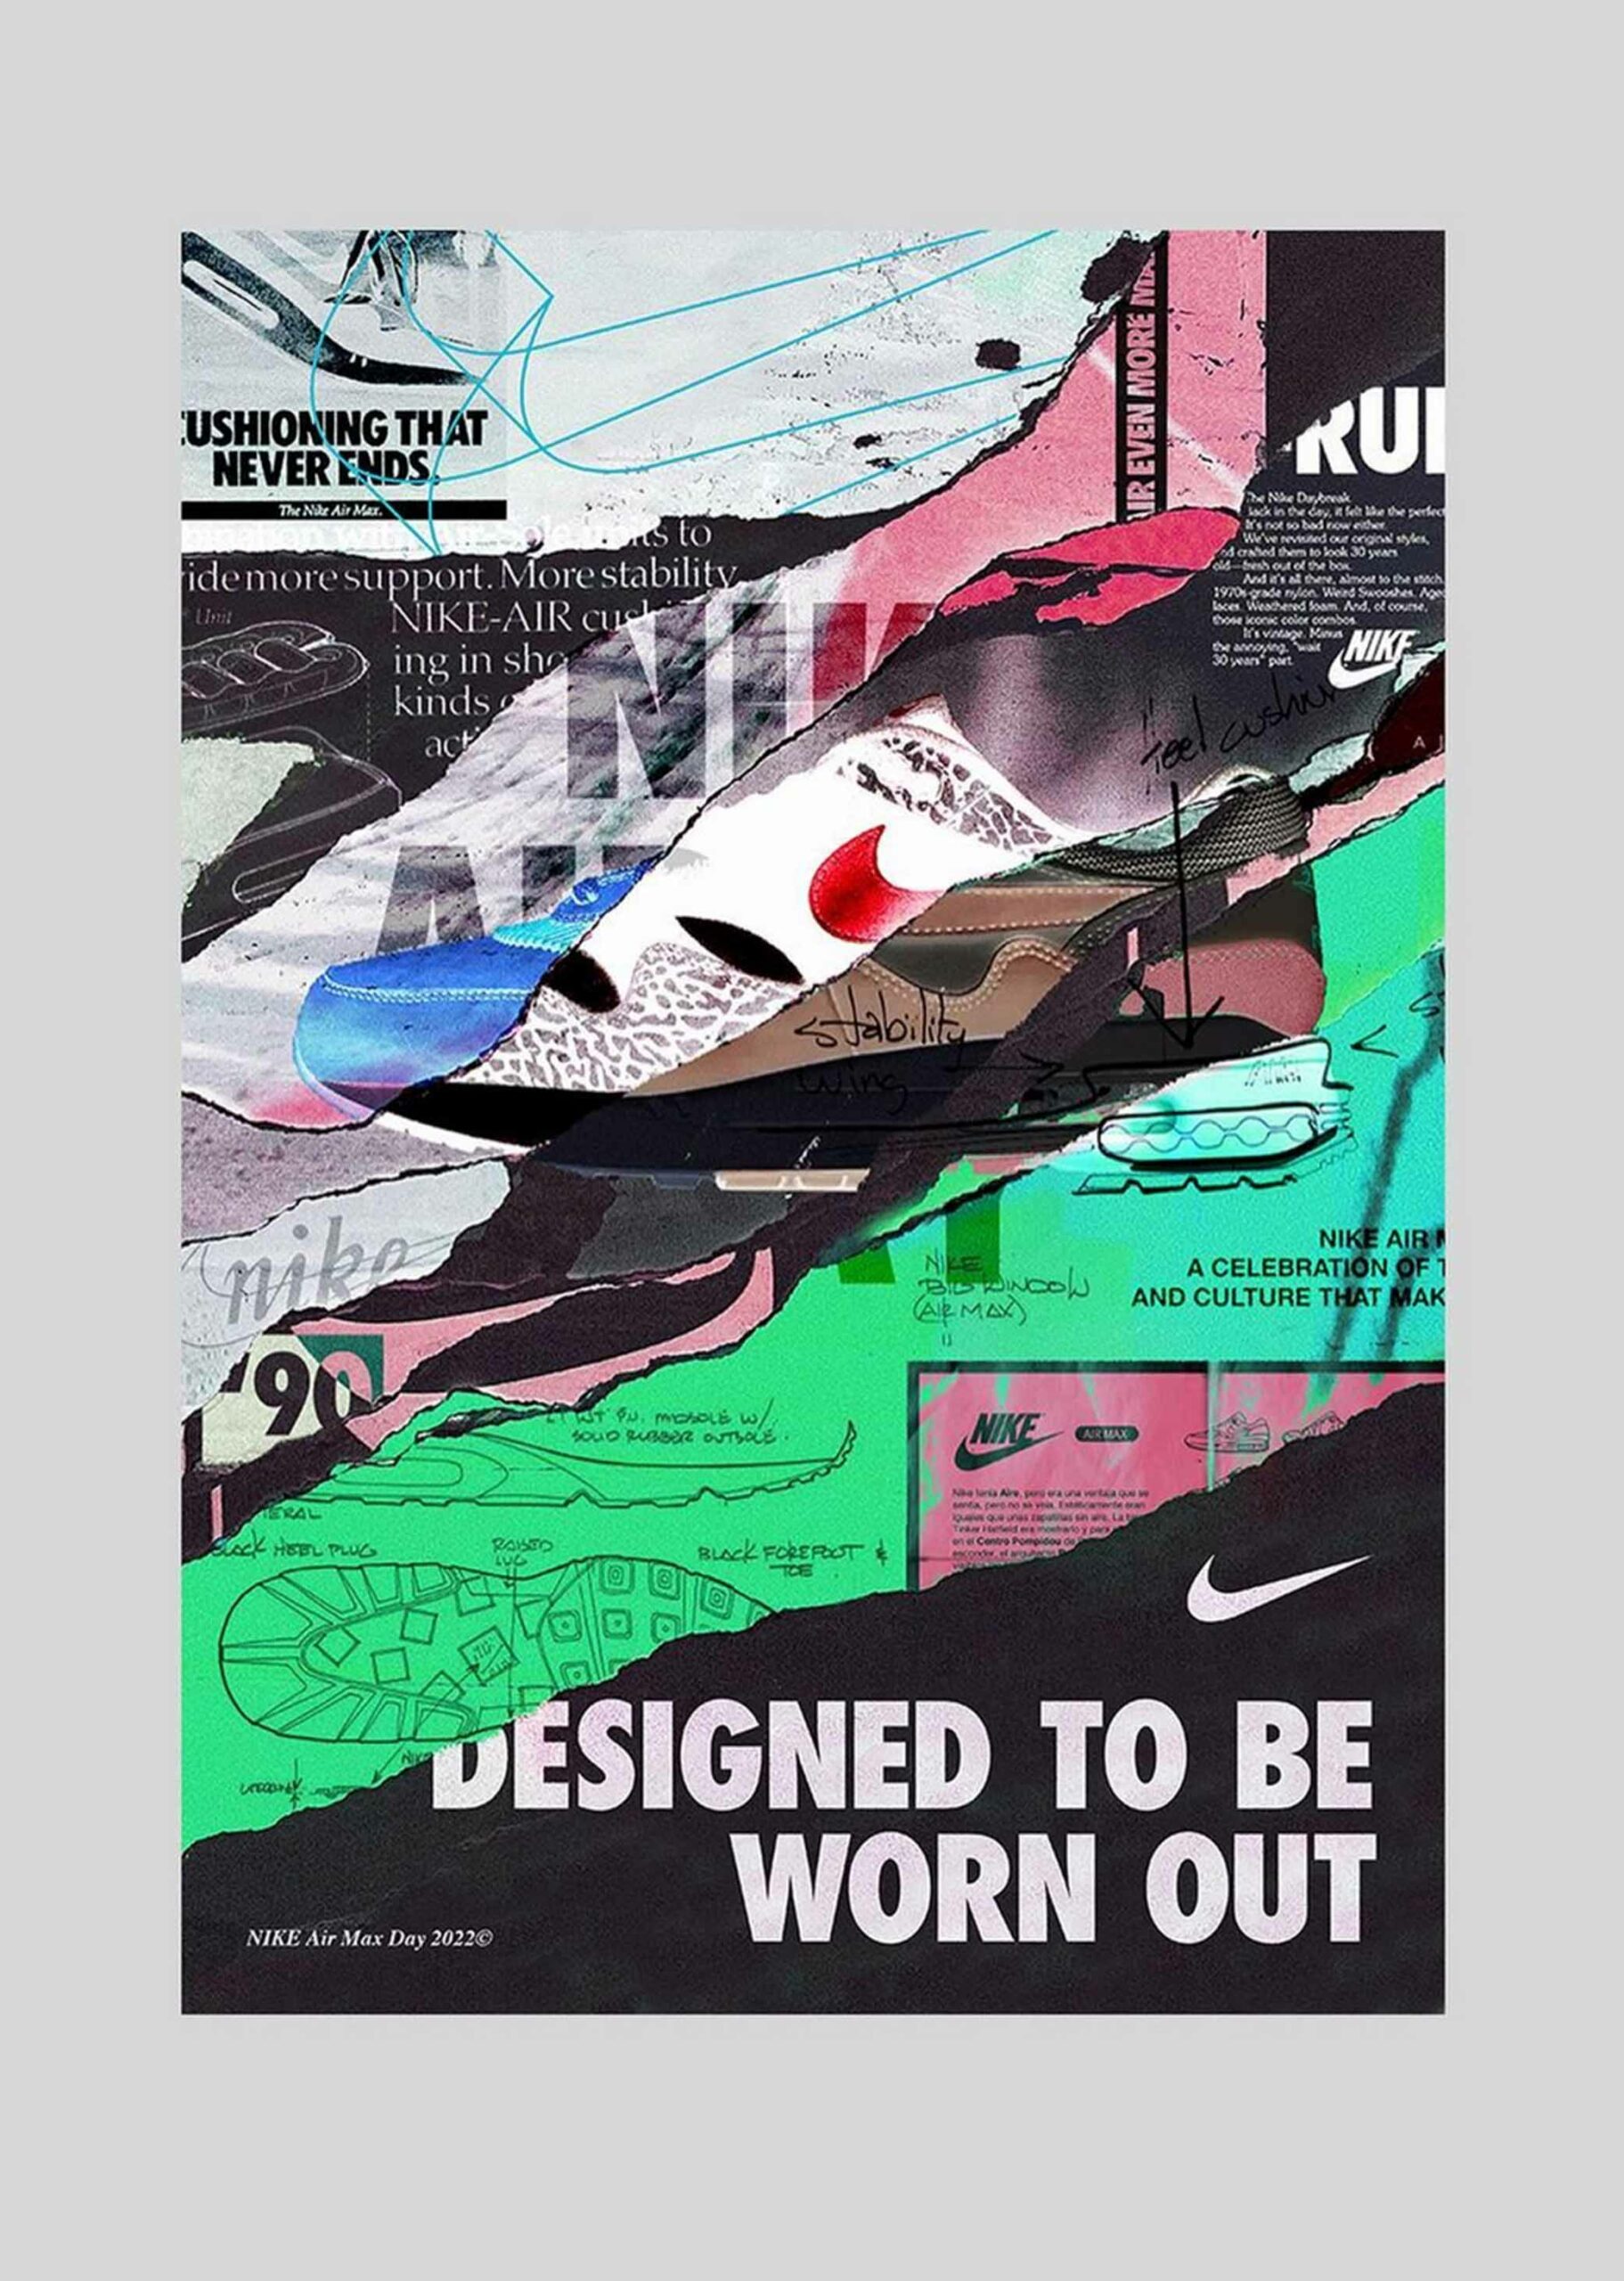 Creative poster design using a ripped paper approach showing a trainer in multiple styles